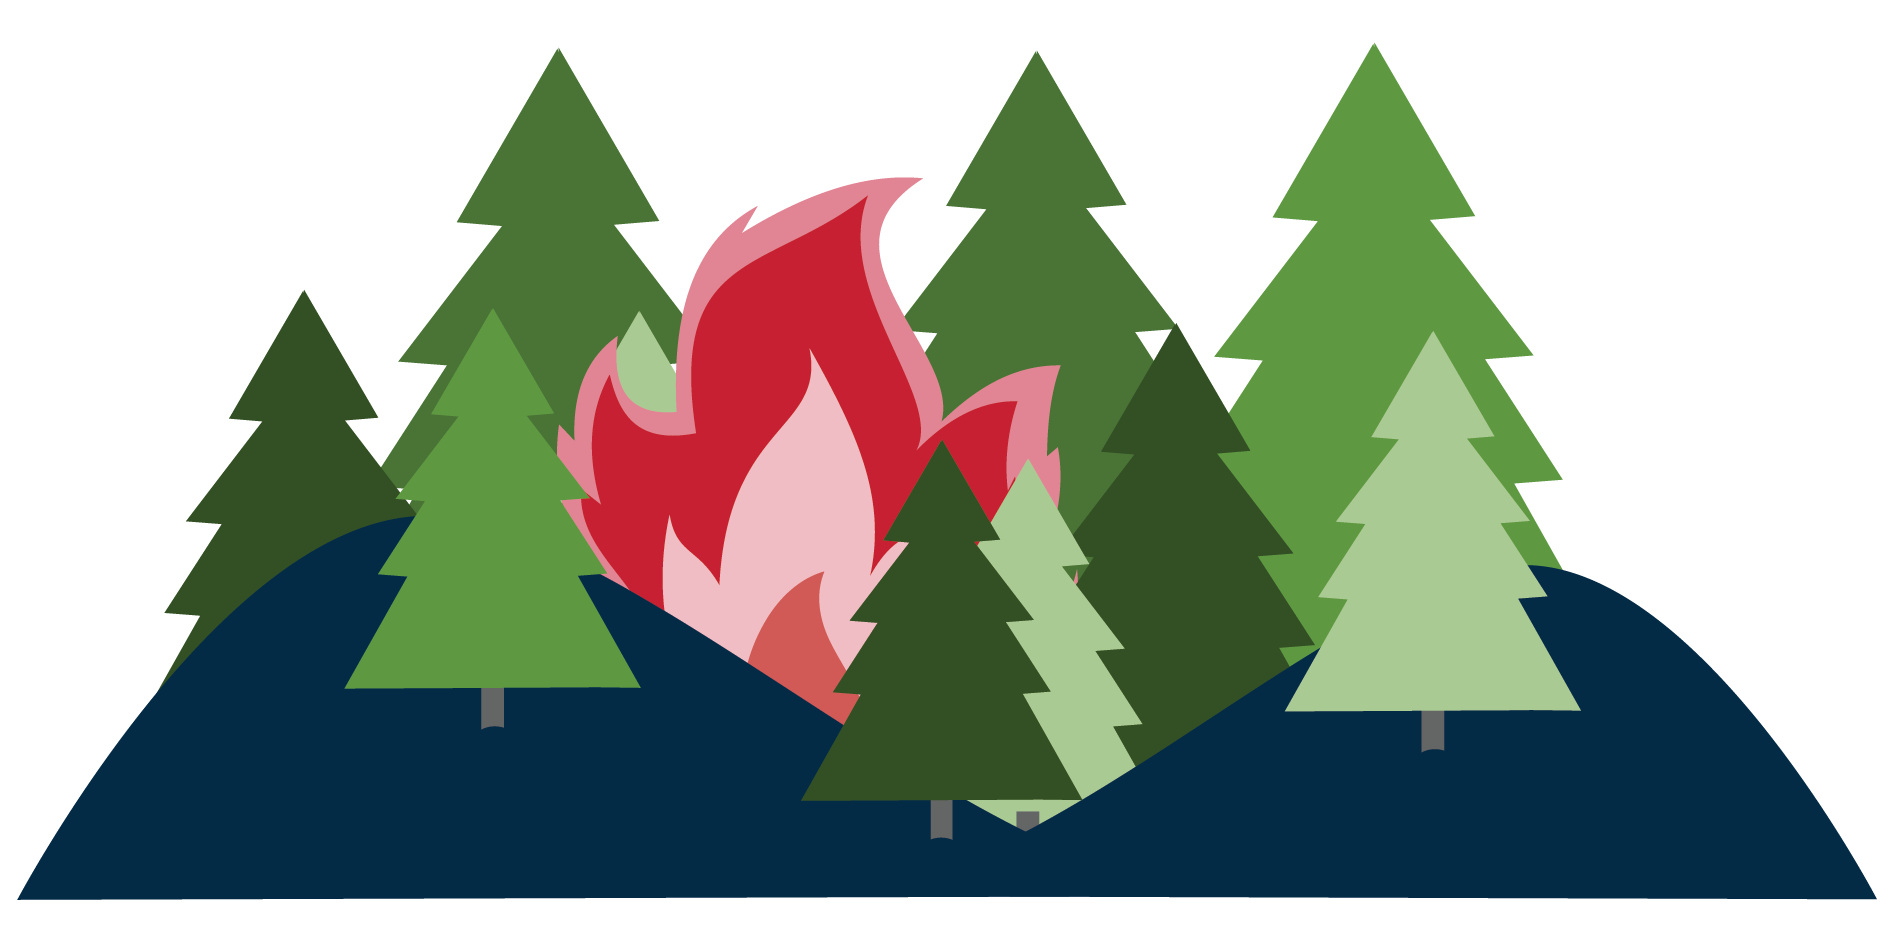 A forest with green trees and a red fire flame